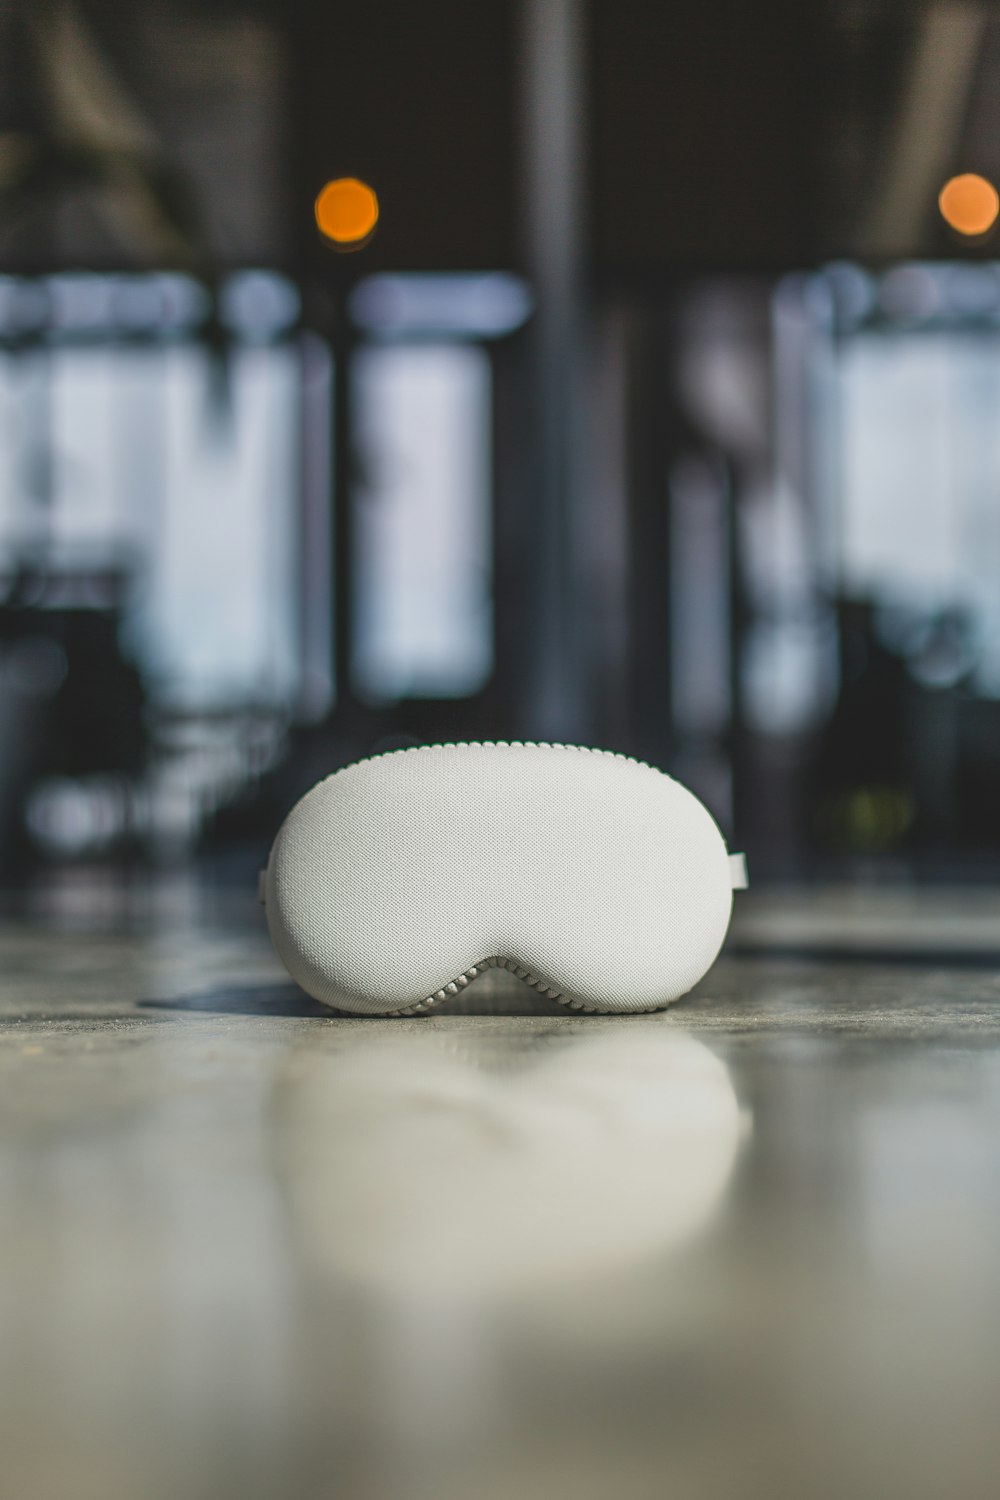 a close up of a white object on a floor